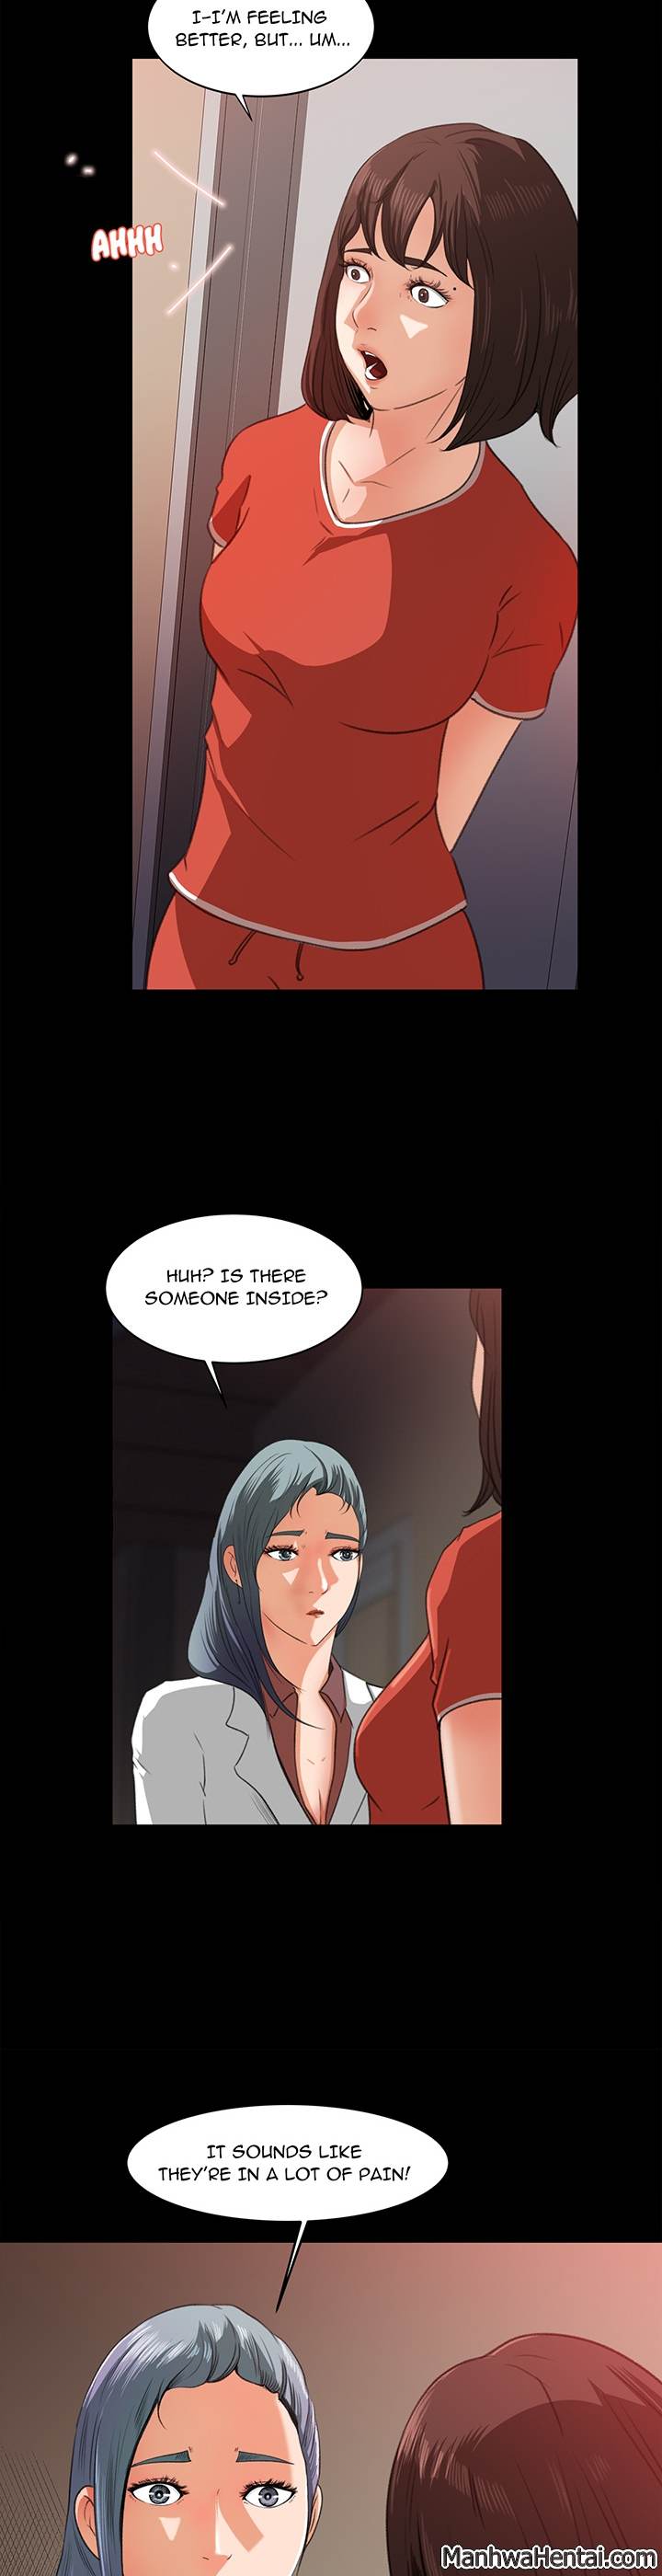 Inside the Uniform - Chapter 14 Page 5